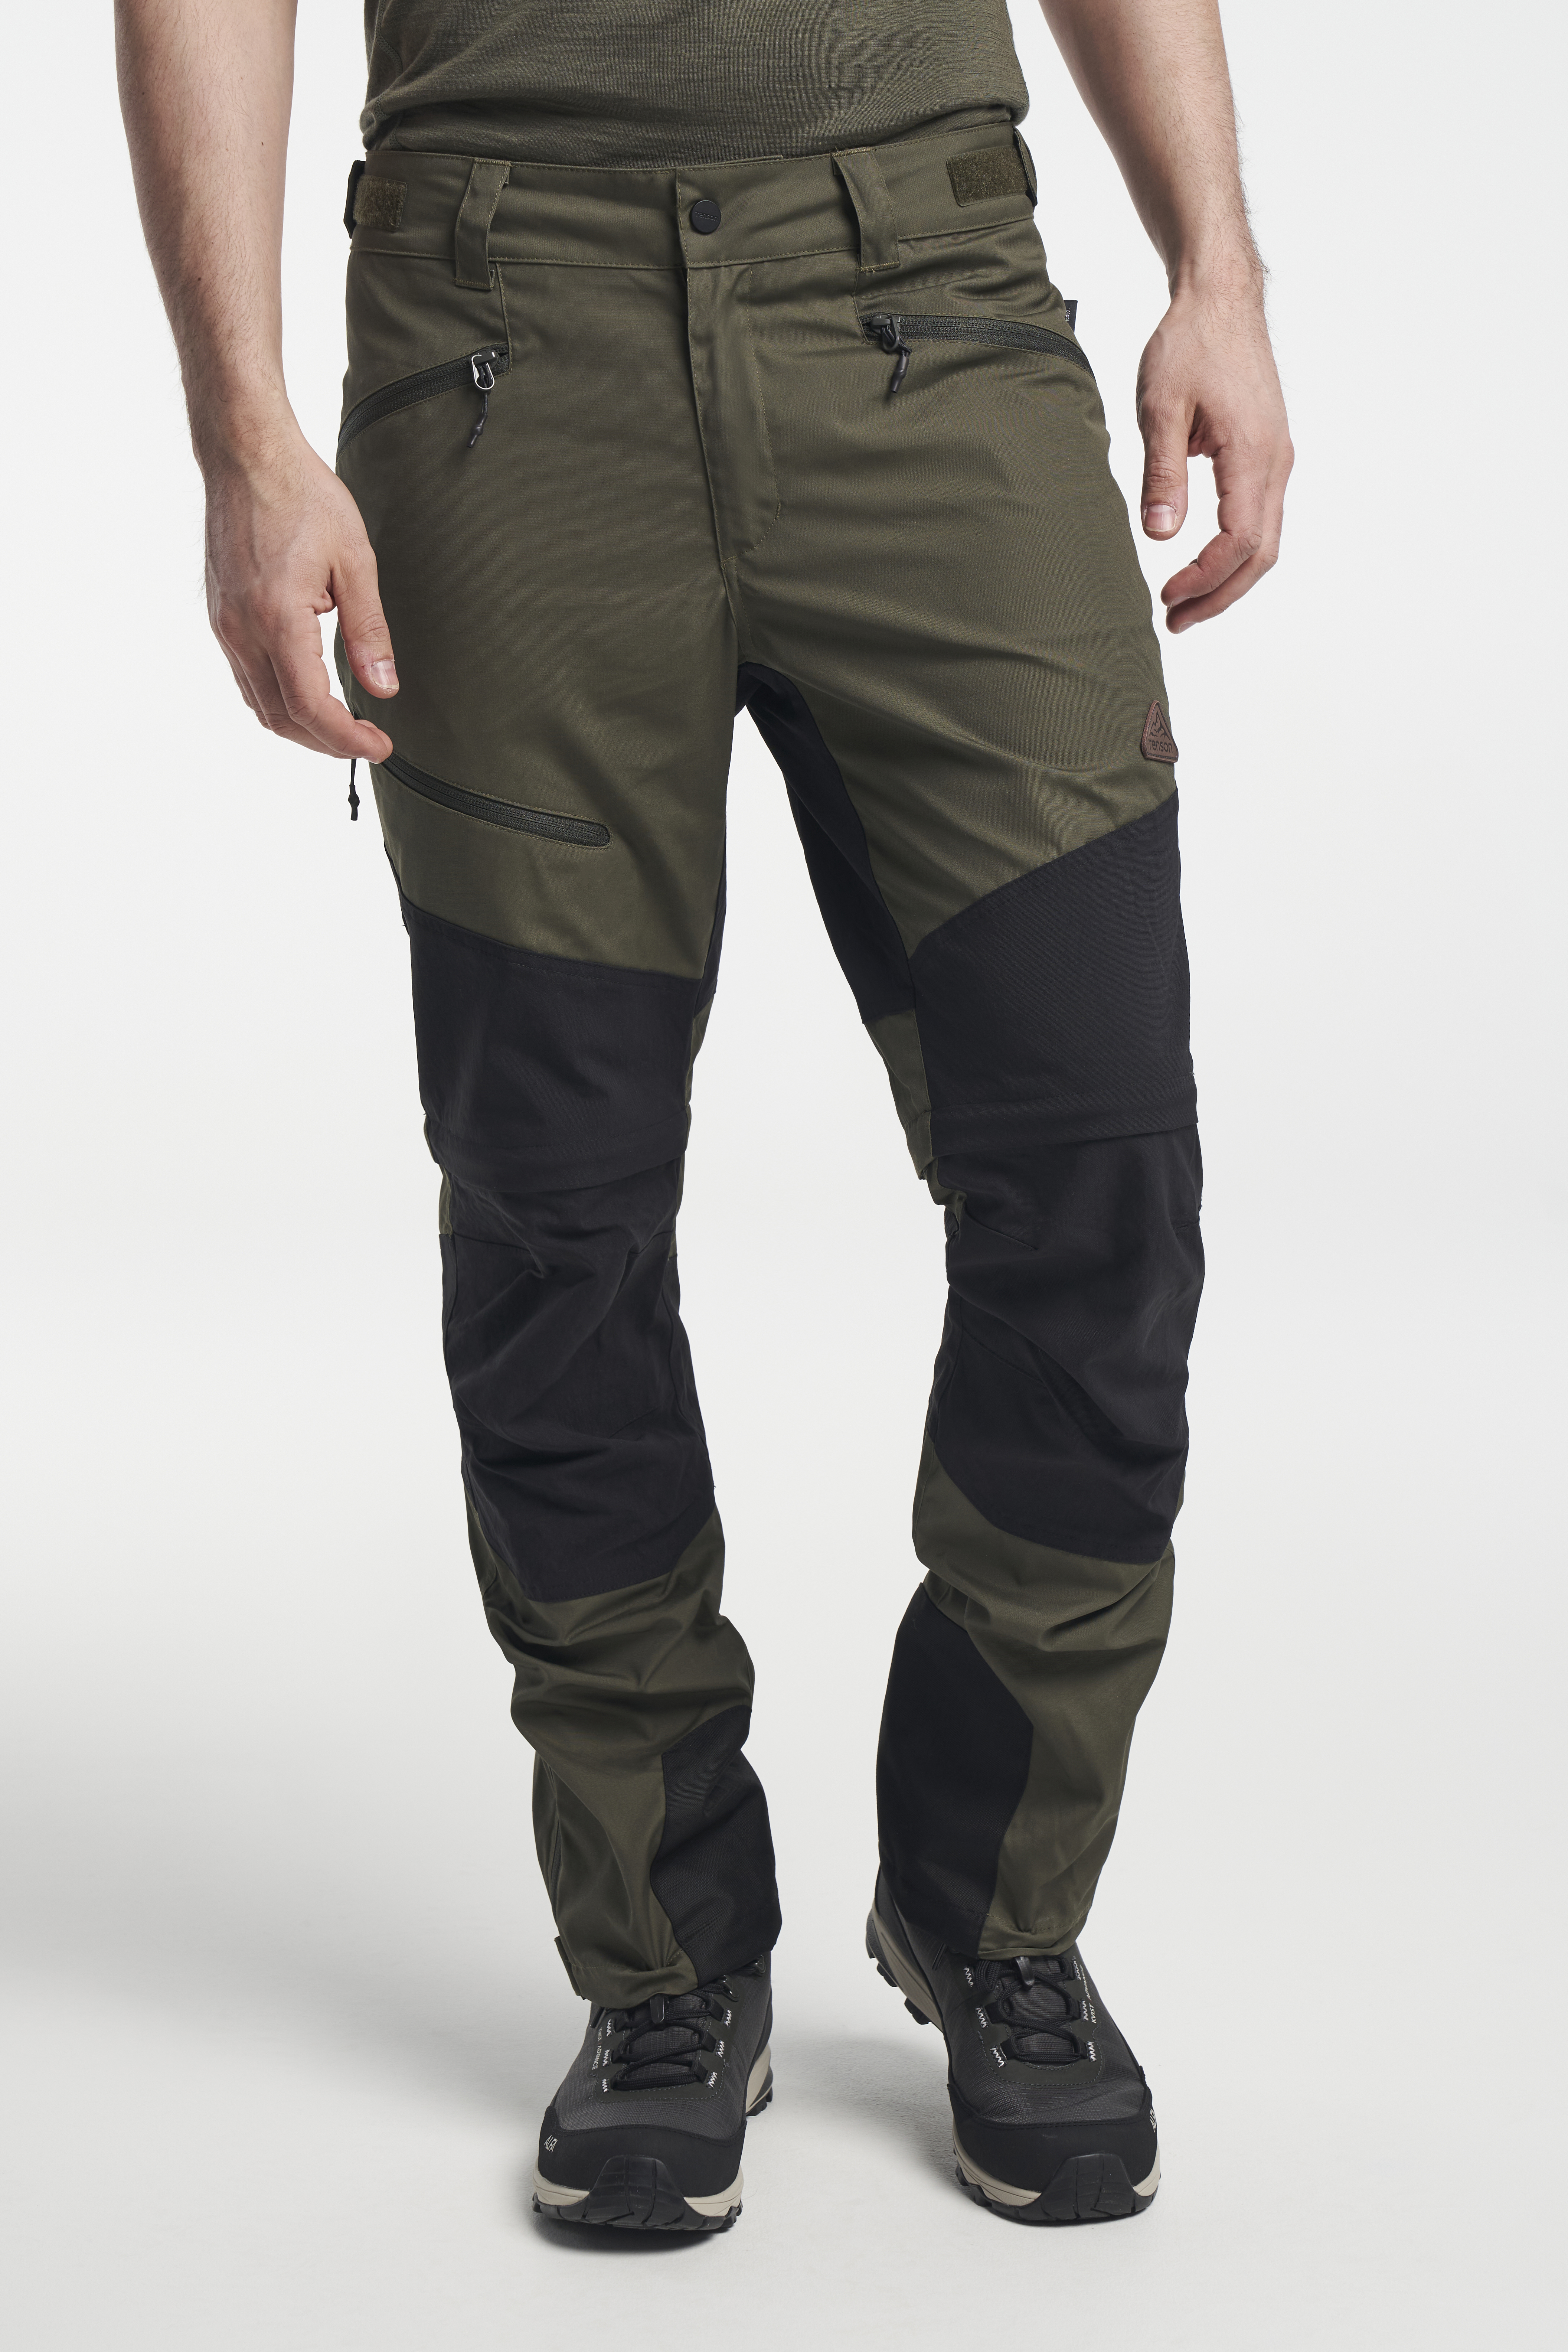 Amazon.com: FREE SOLDIER Hiking Pants for Men Quick Dry Cargo Pants Outdoor  Casual Work Waterproof Lightweight Zipper Leg Pants（Khaki30Wx32L） :  Clothing, Shoes & Jewelry